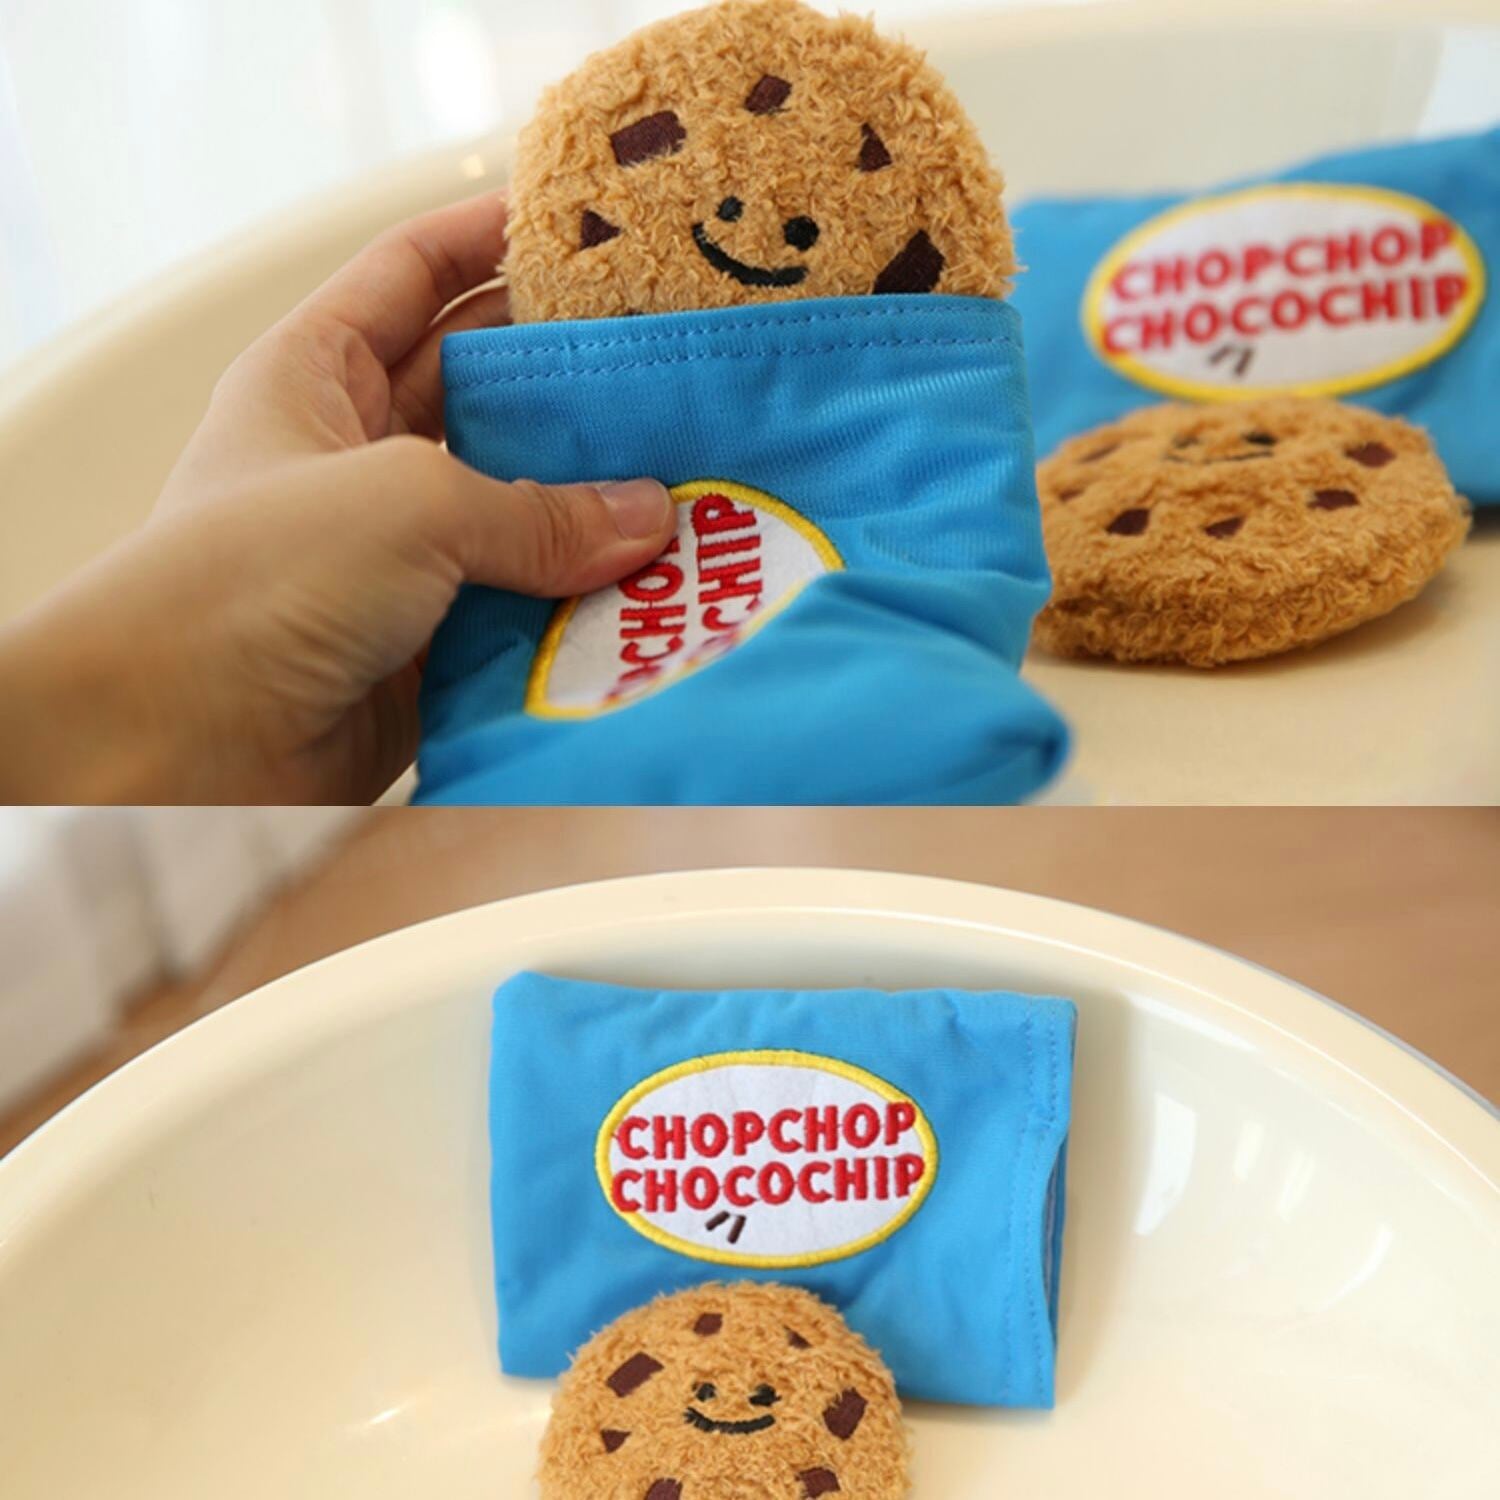 CHOCO-CHIP COOKIE TOY